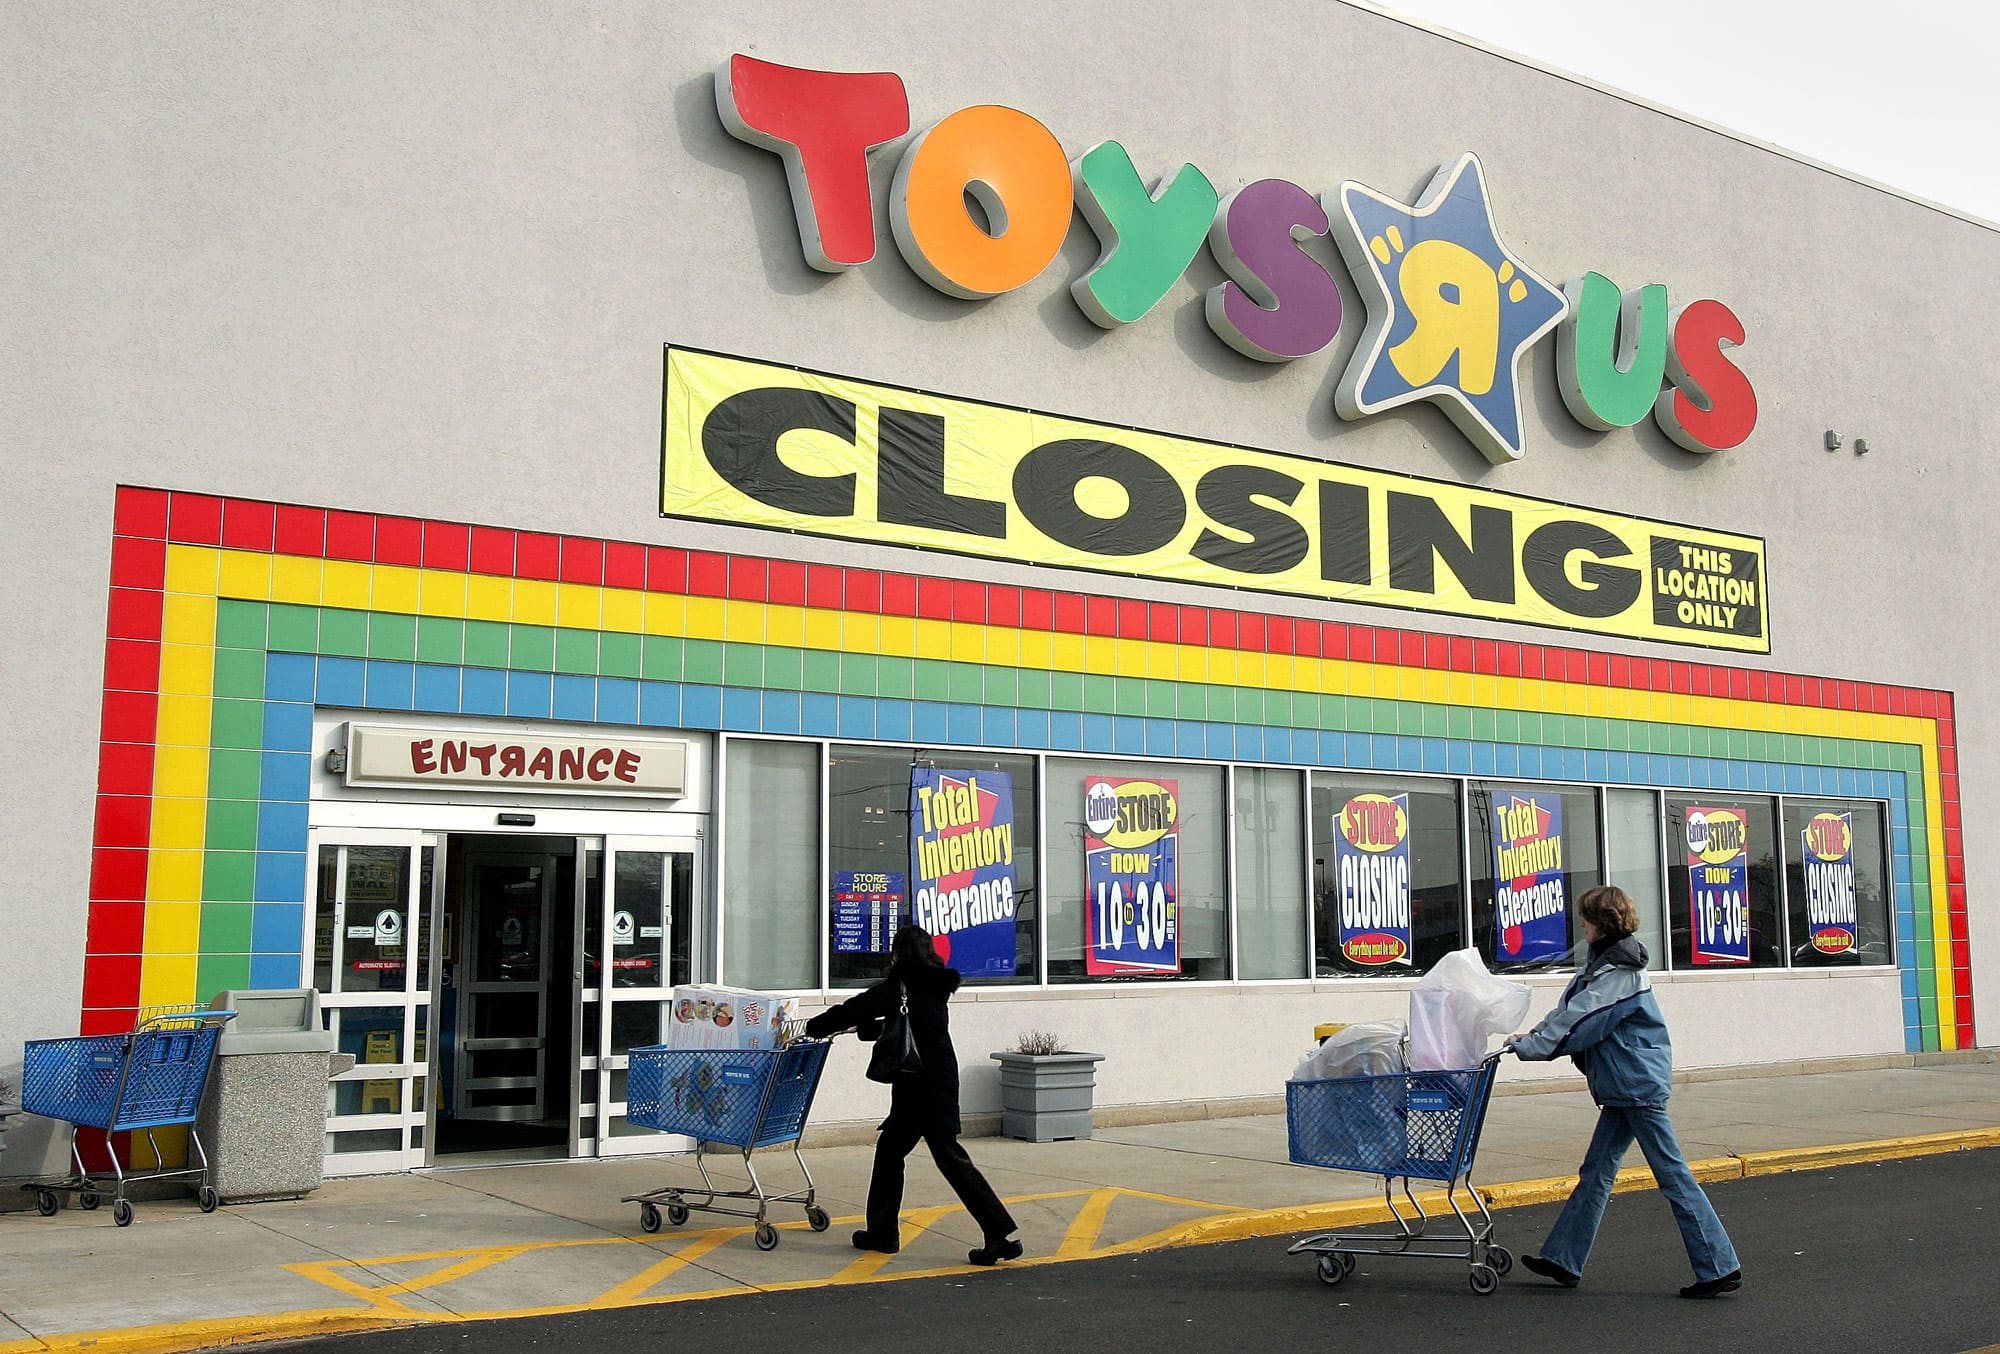 More Toys R Us stores went up for sale. Here's what's moving in